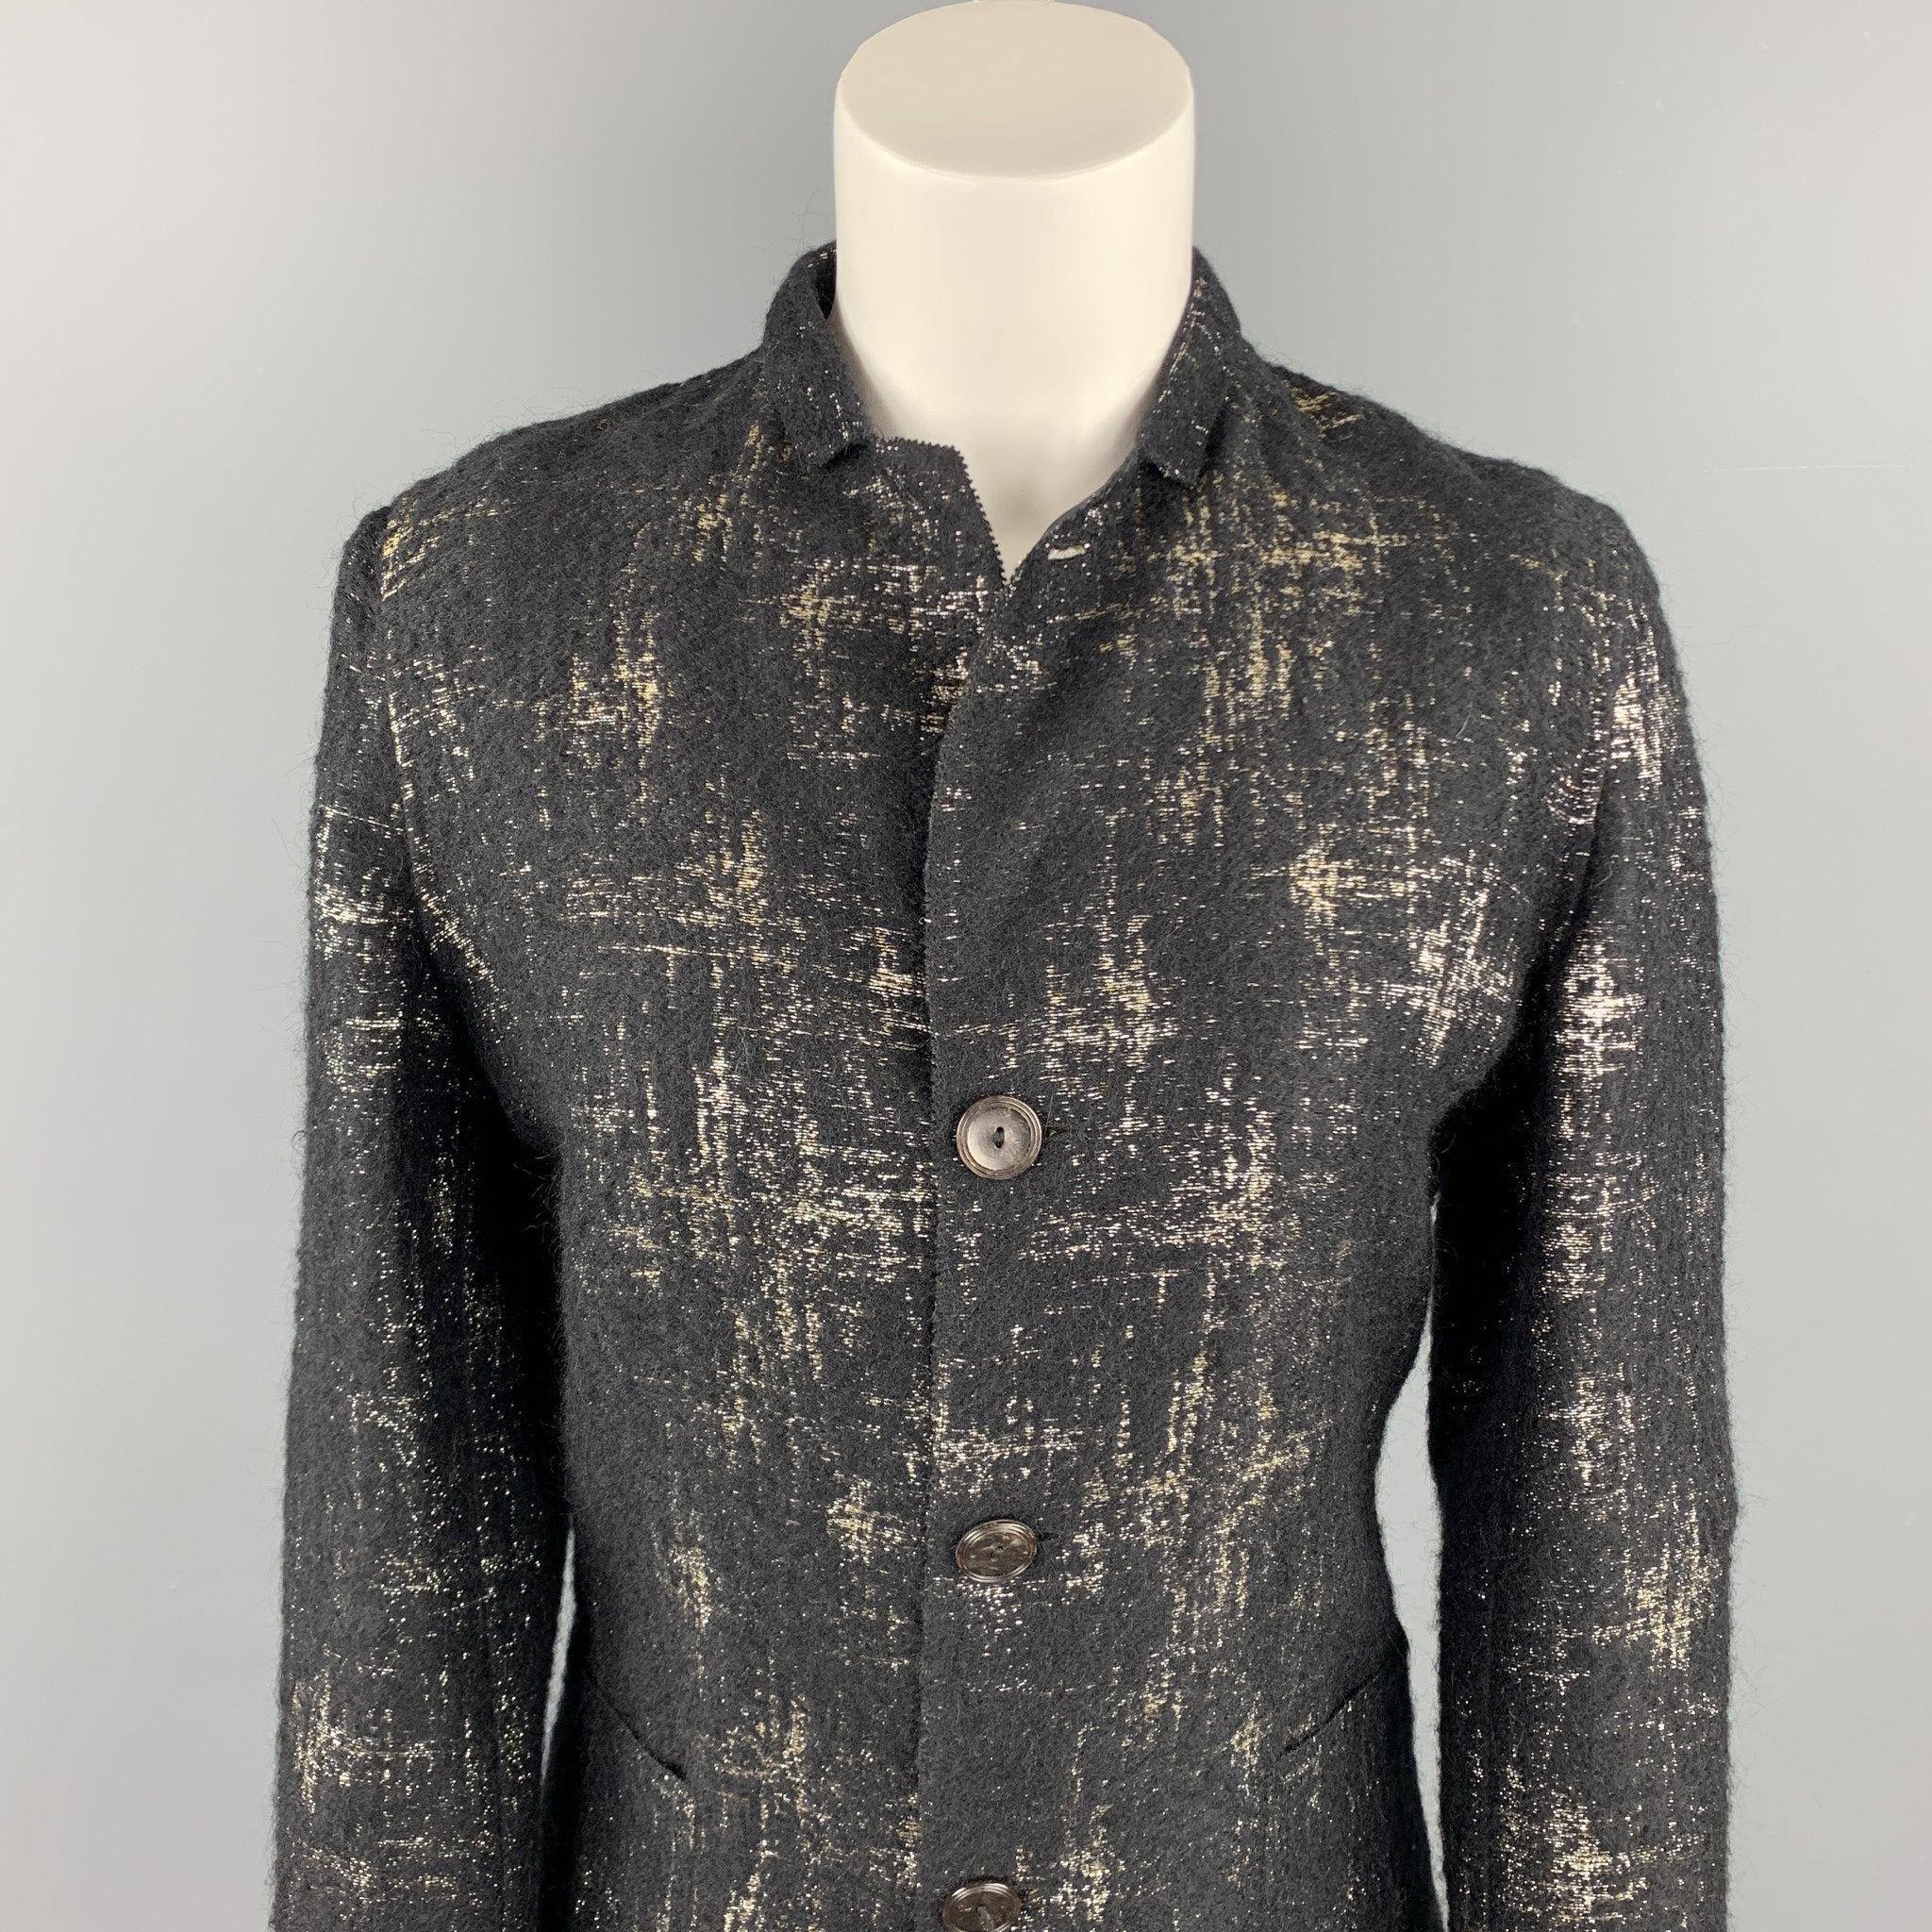 JEAN PAUL GAULTIER Femme jacket comes in a black & silver textured silk featuring a mary jane style, front pockets, and a buttoned closure. Made in Italy.Excellent
 Pre-Owned Condition. 
 

 Marked:  US 8
  UK 10
  IT 42
  
 

 Measurements: 
  
